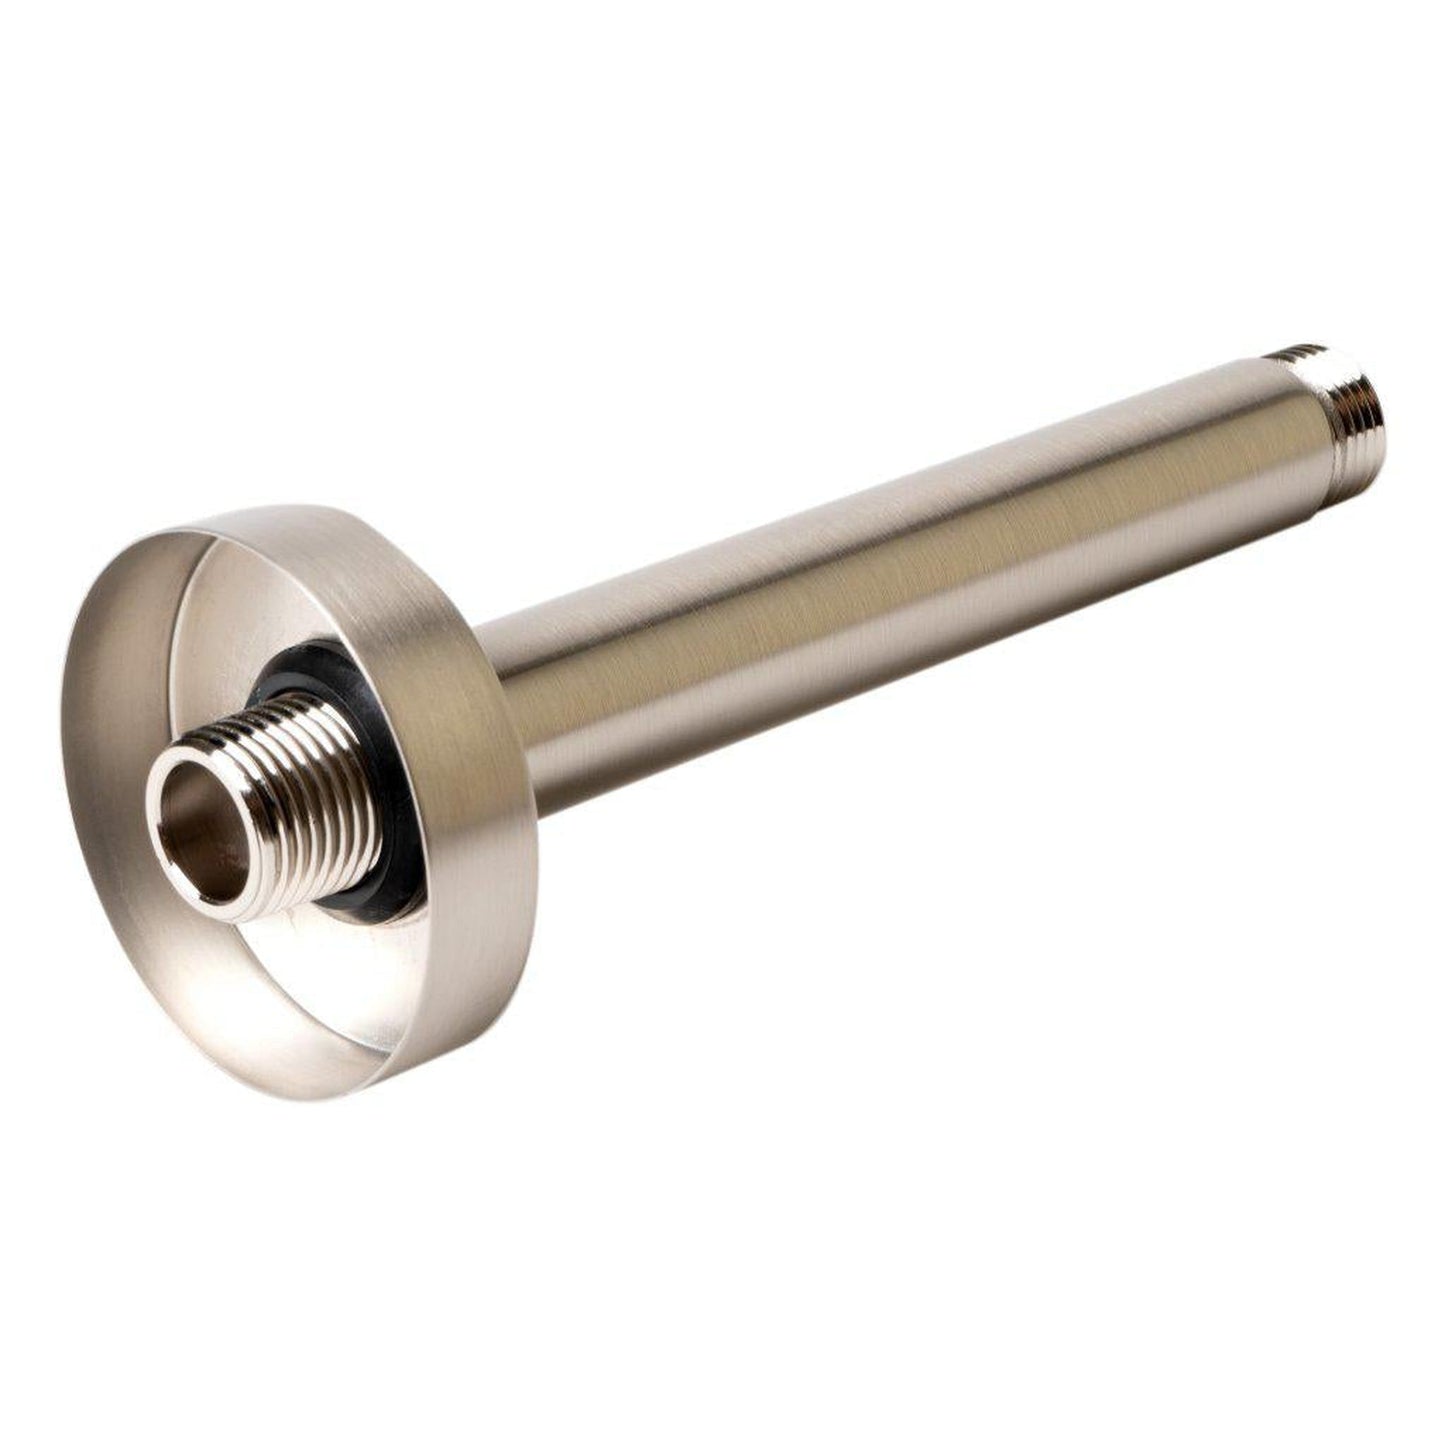 ALFI Brand ABSA6R-BN 6" Brushed Nickel Ceiling Mounted Round Solid Brass Shower Arm